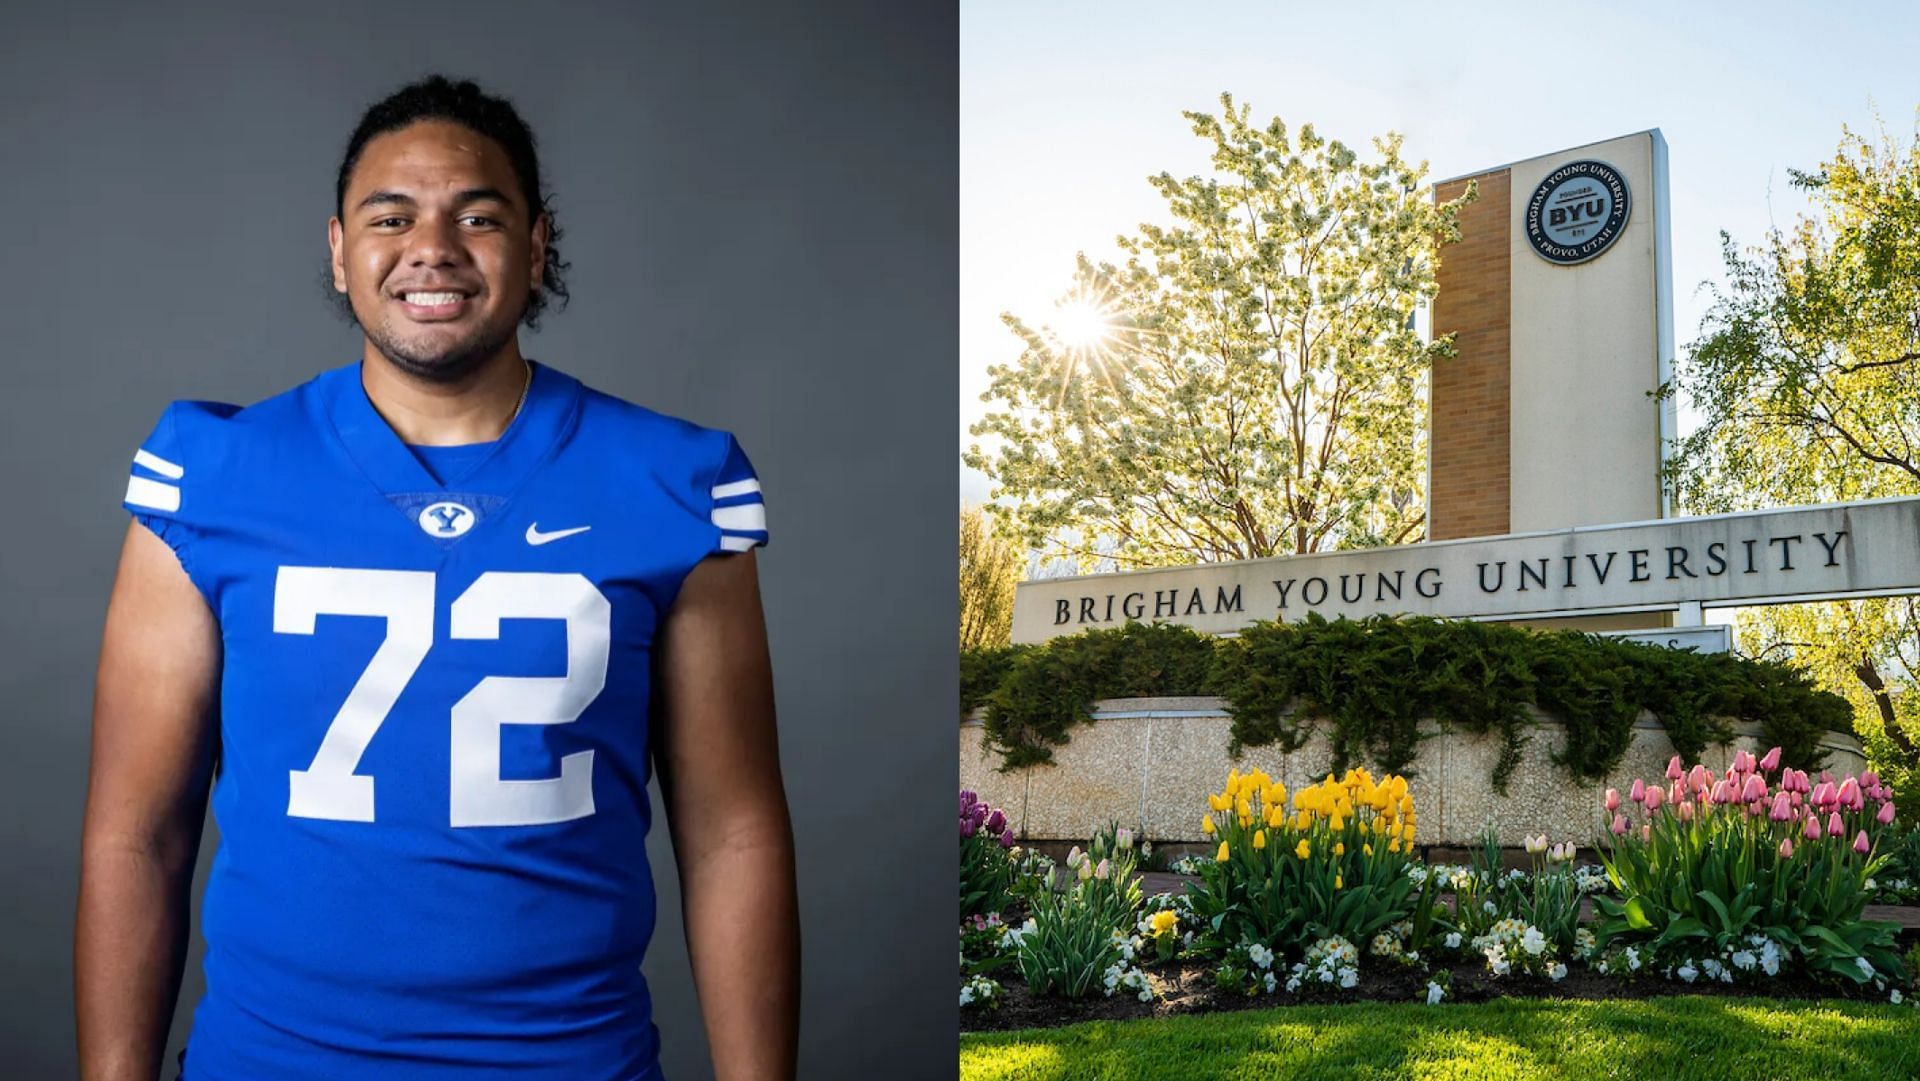 22-year-old BYU footballer, Sione Veikoso dies in a tragic accident in Hawaii on December 30. (Image via Joey Garrison/BYU, Brigham Young University Provo)